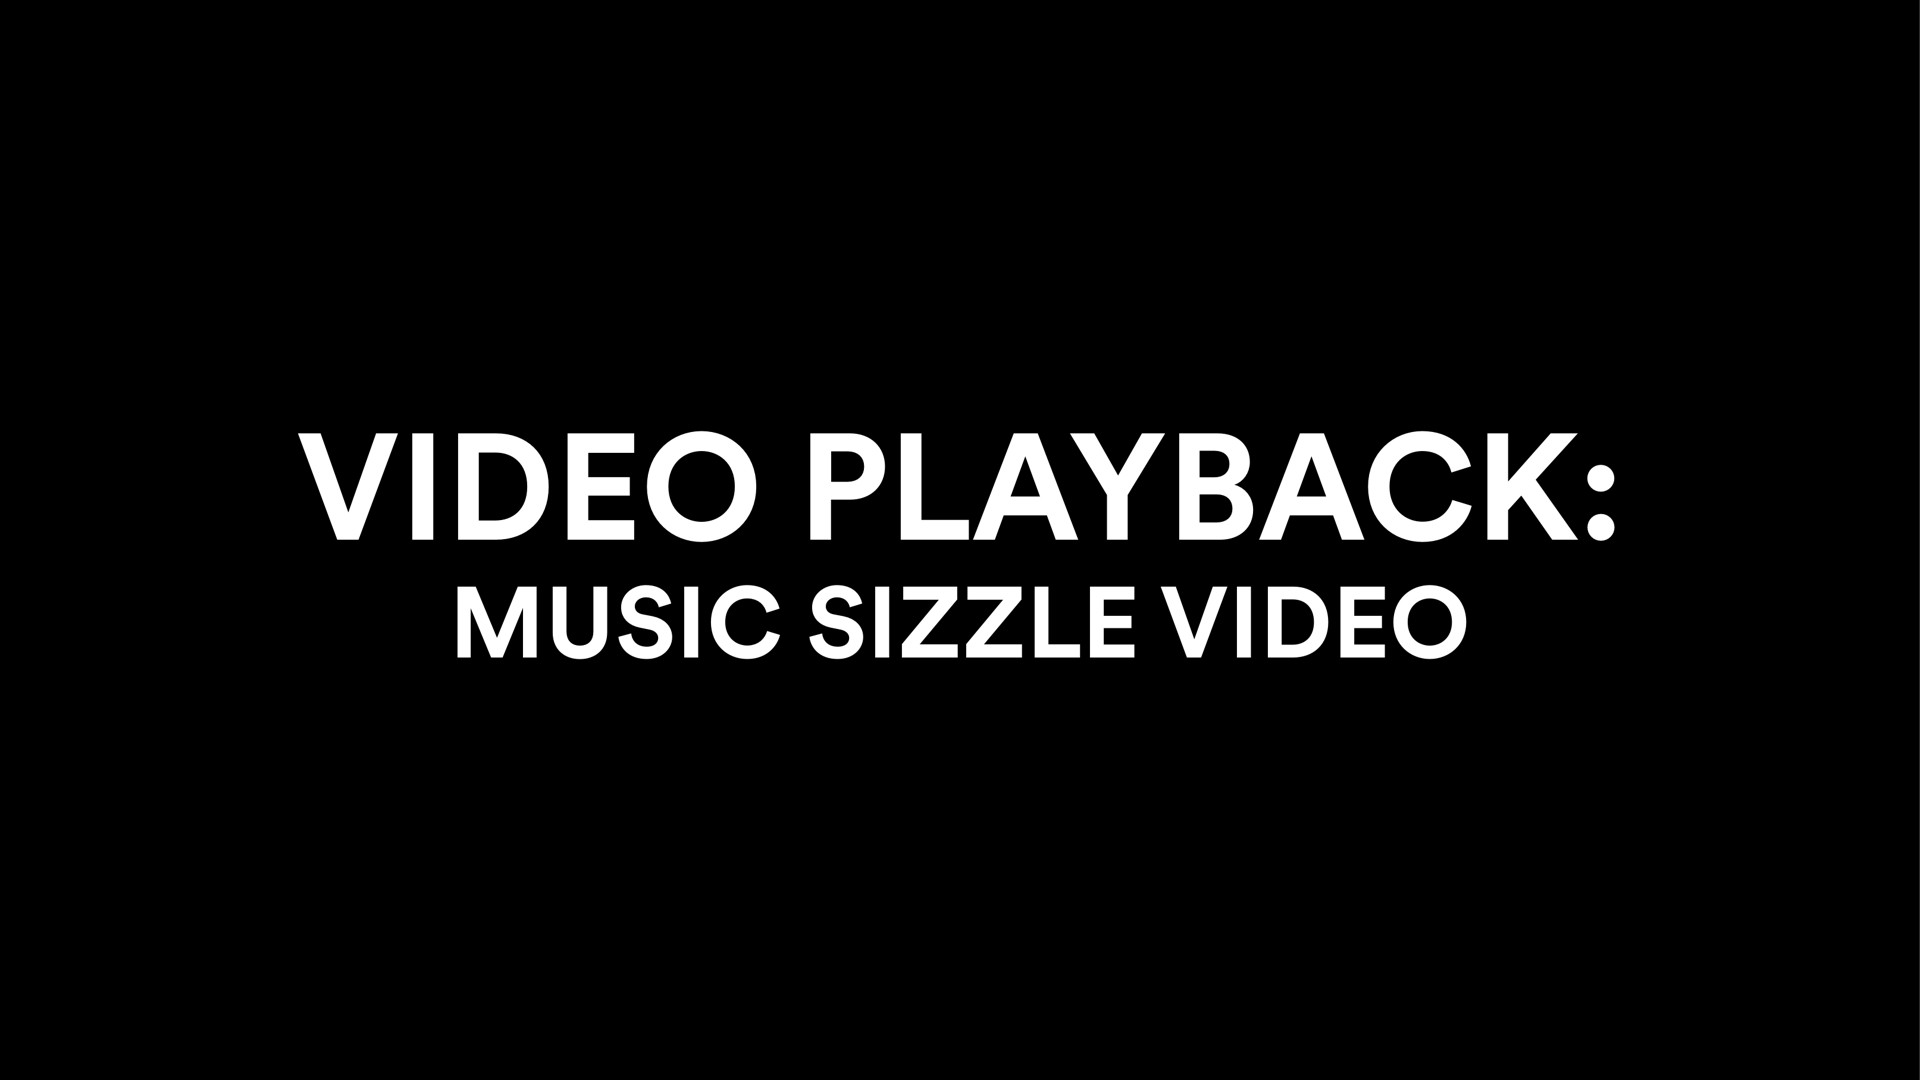 video playback music sizzle video | Spotify